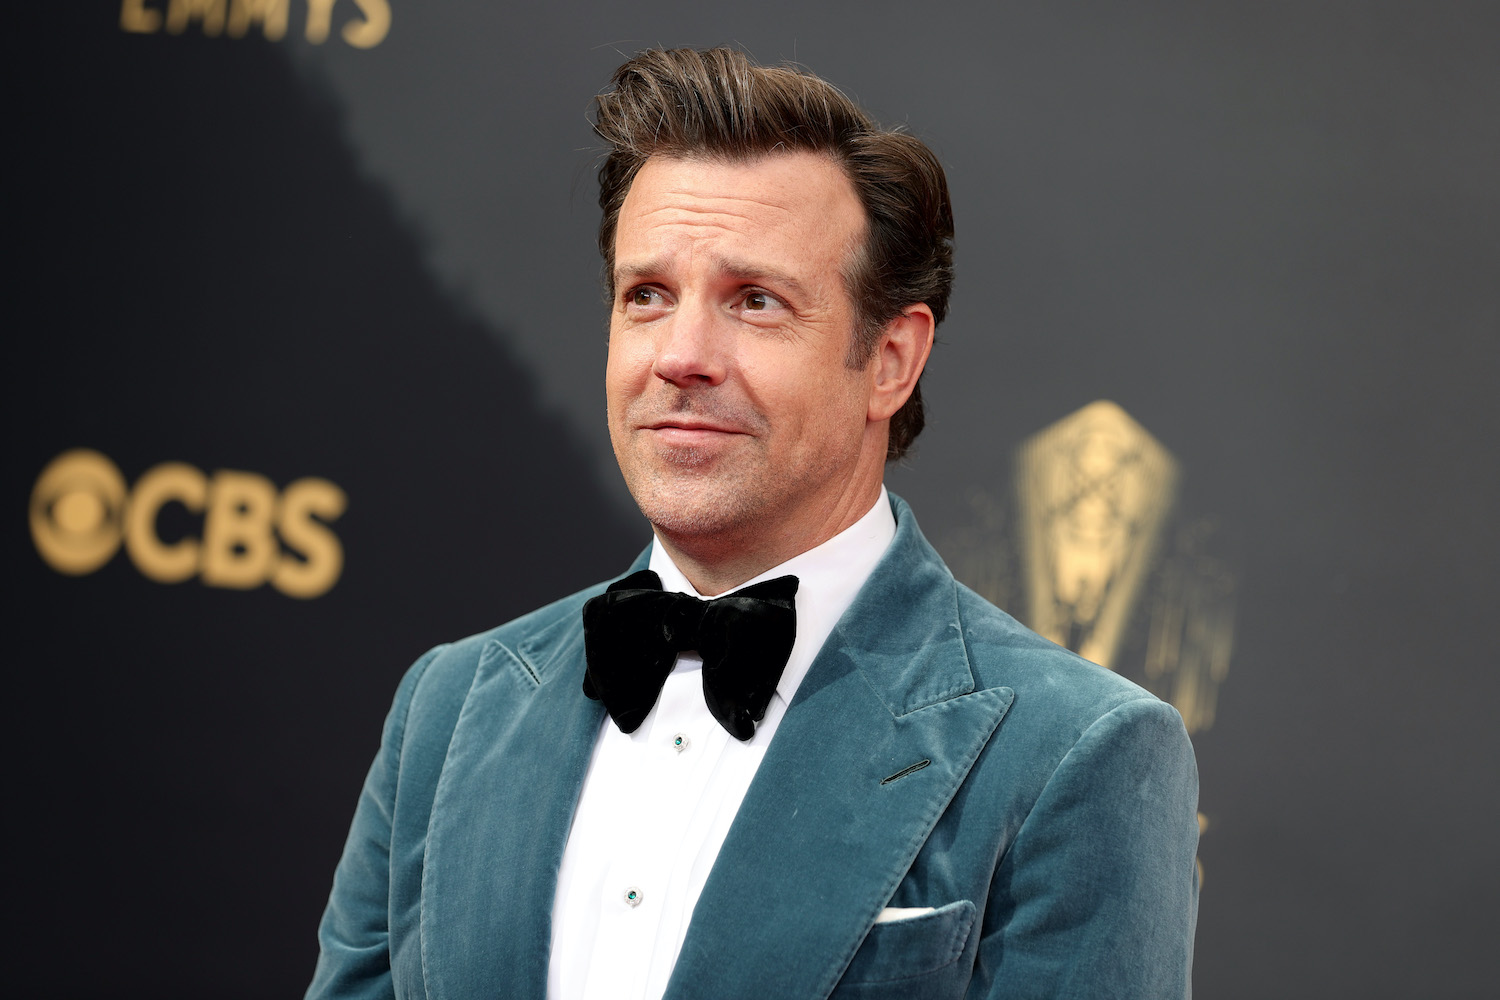 Jason Sudeikis wears a velvet suit on the 2021 Emmys red carpet